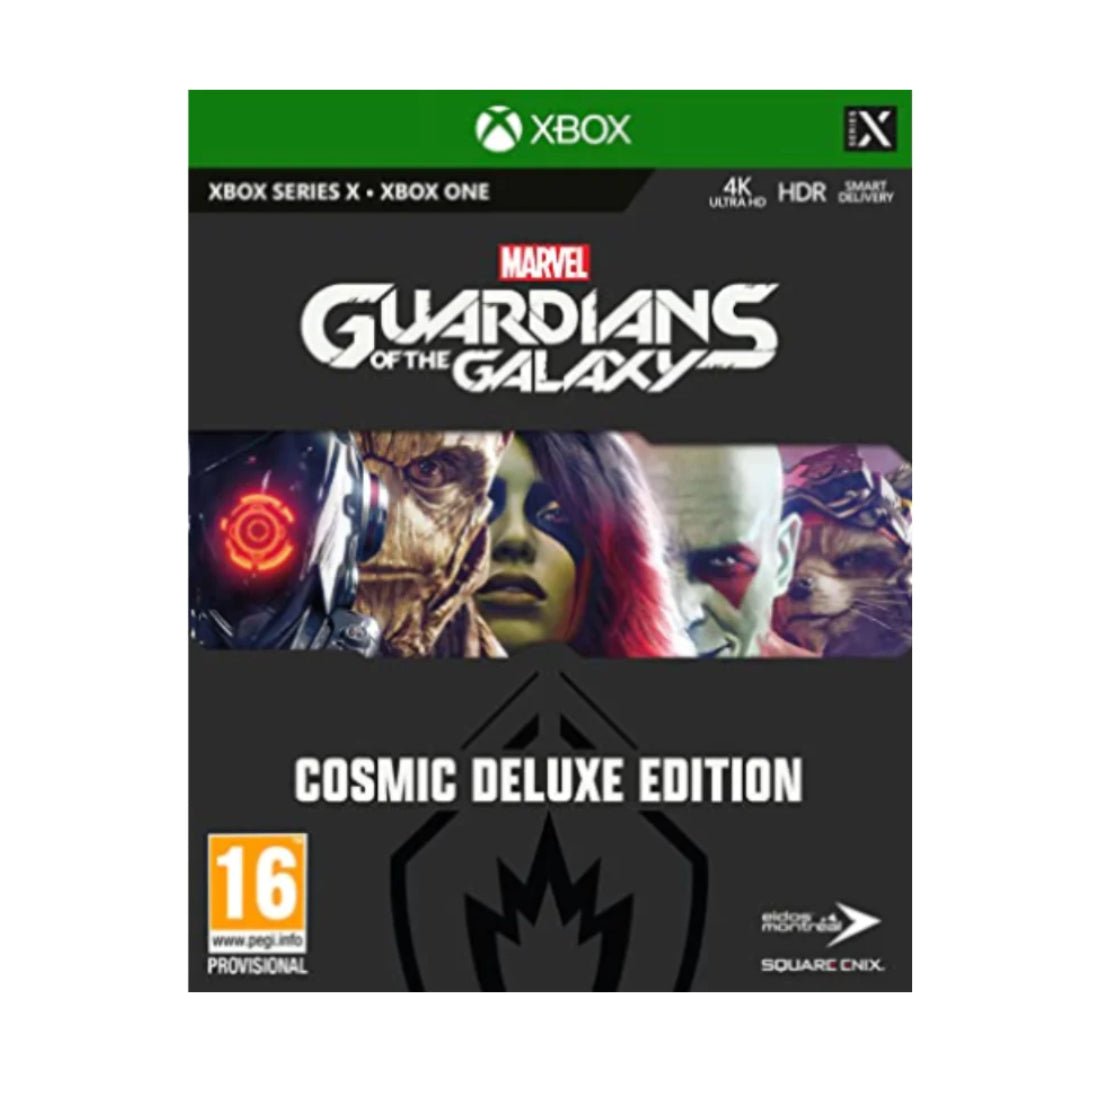 Marvel's Guardians of the Galaxy - Cosmic Deluxe Edition - Xbox - لعبة - Store 974 | ستور ٩٧٤